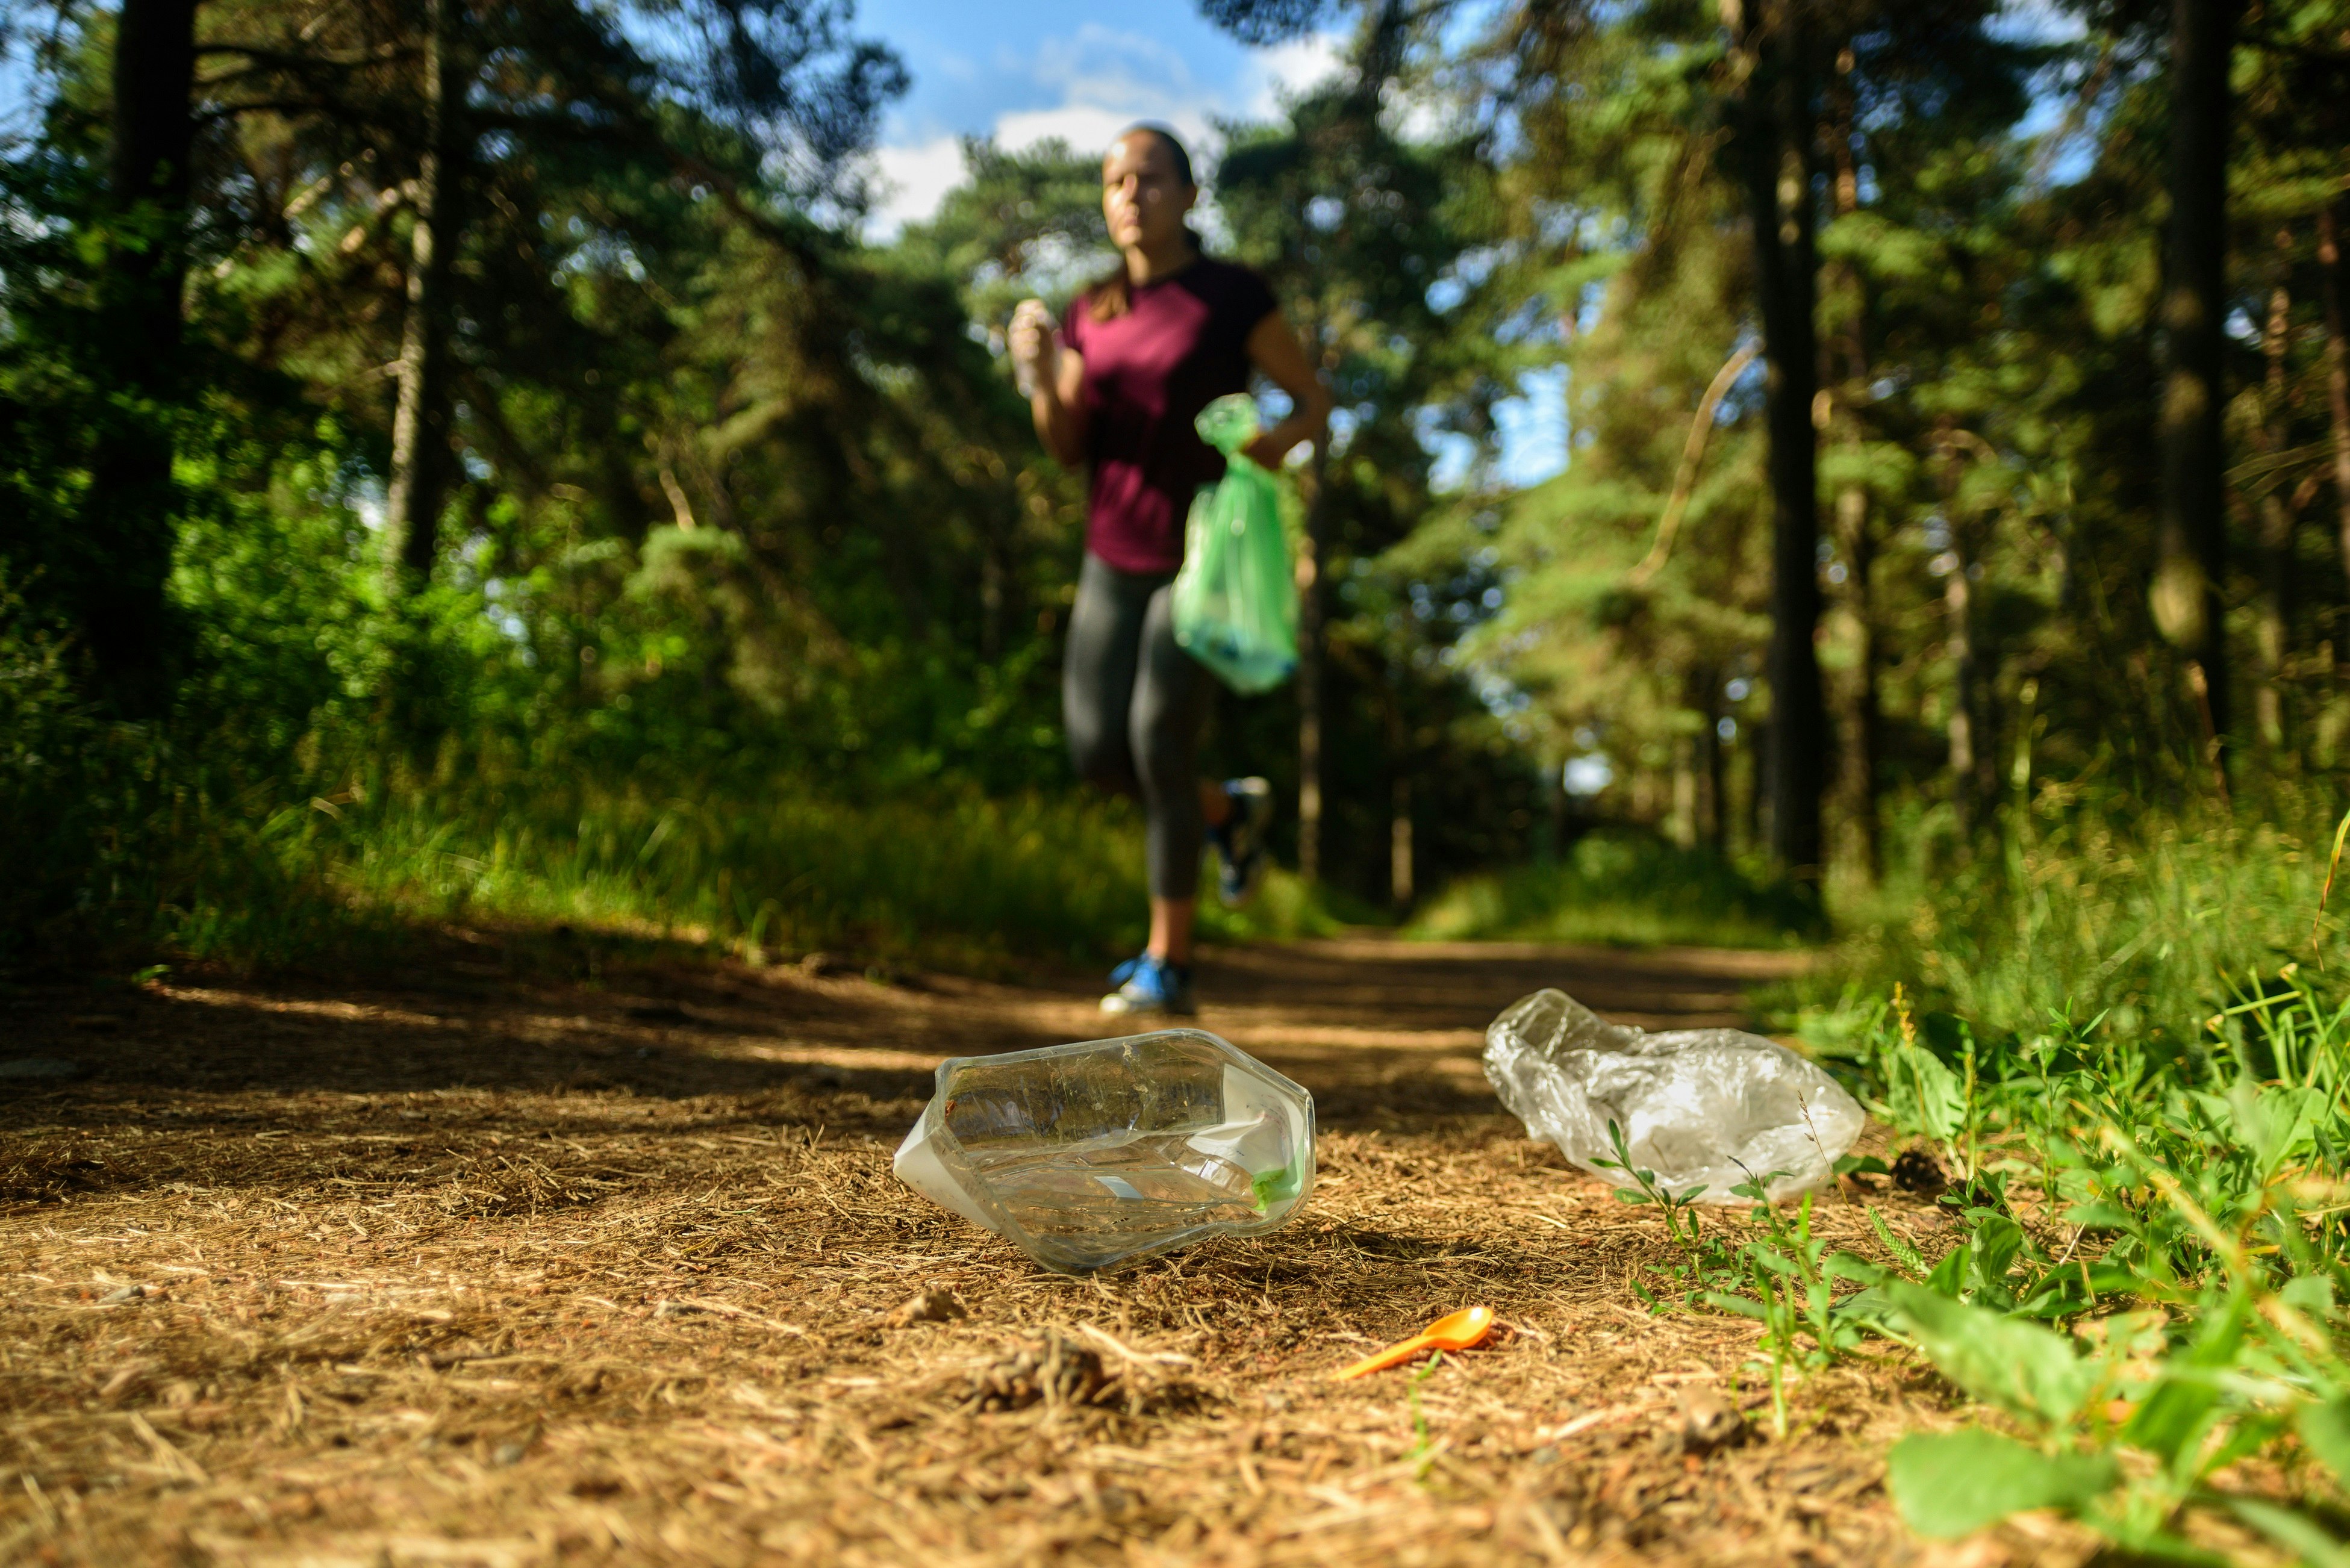 A woman in a bright green jacket and carrying a recycling bag jogs through a forest towards two discarded plastic cups in the foreground of the image.